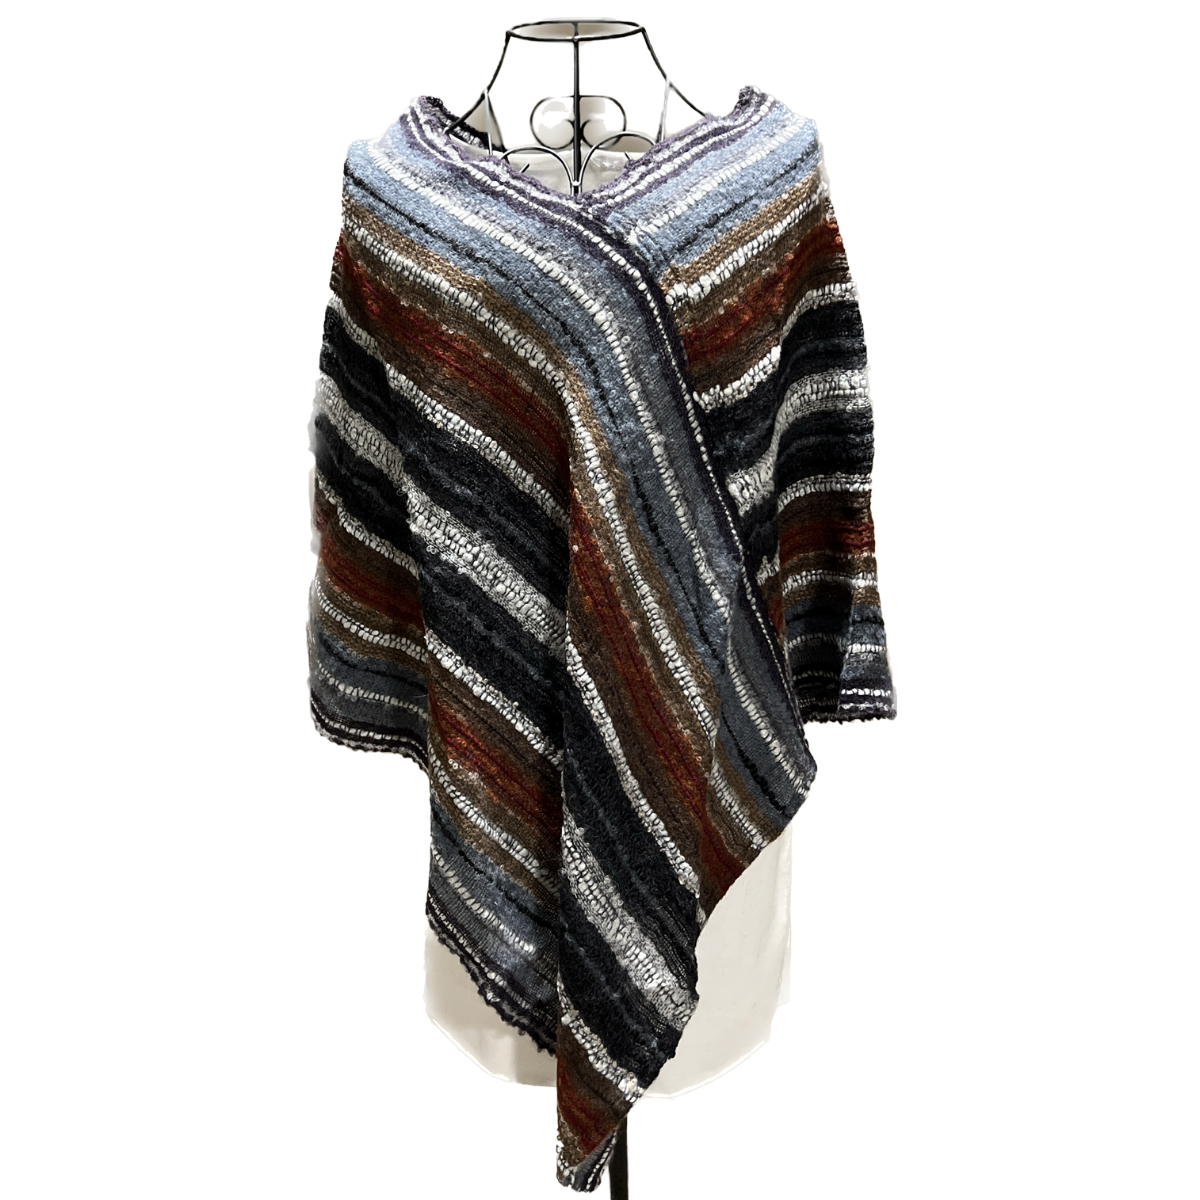 Multi-Color Striped 100% Alpaca Wool Knit Fringed Poncho, 'Swirling Fire